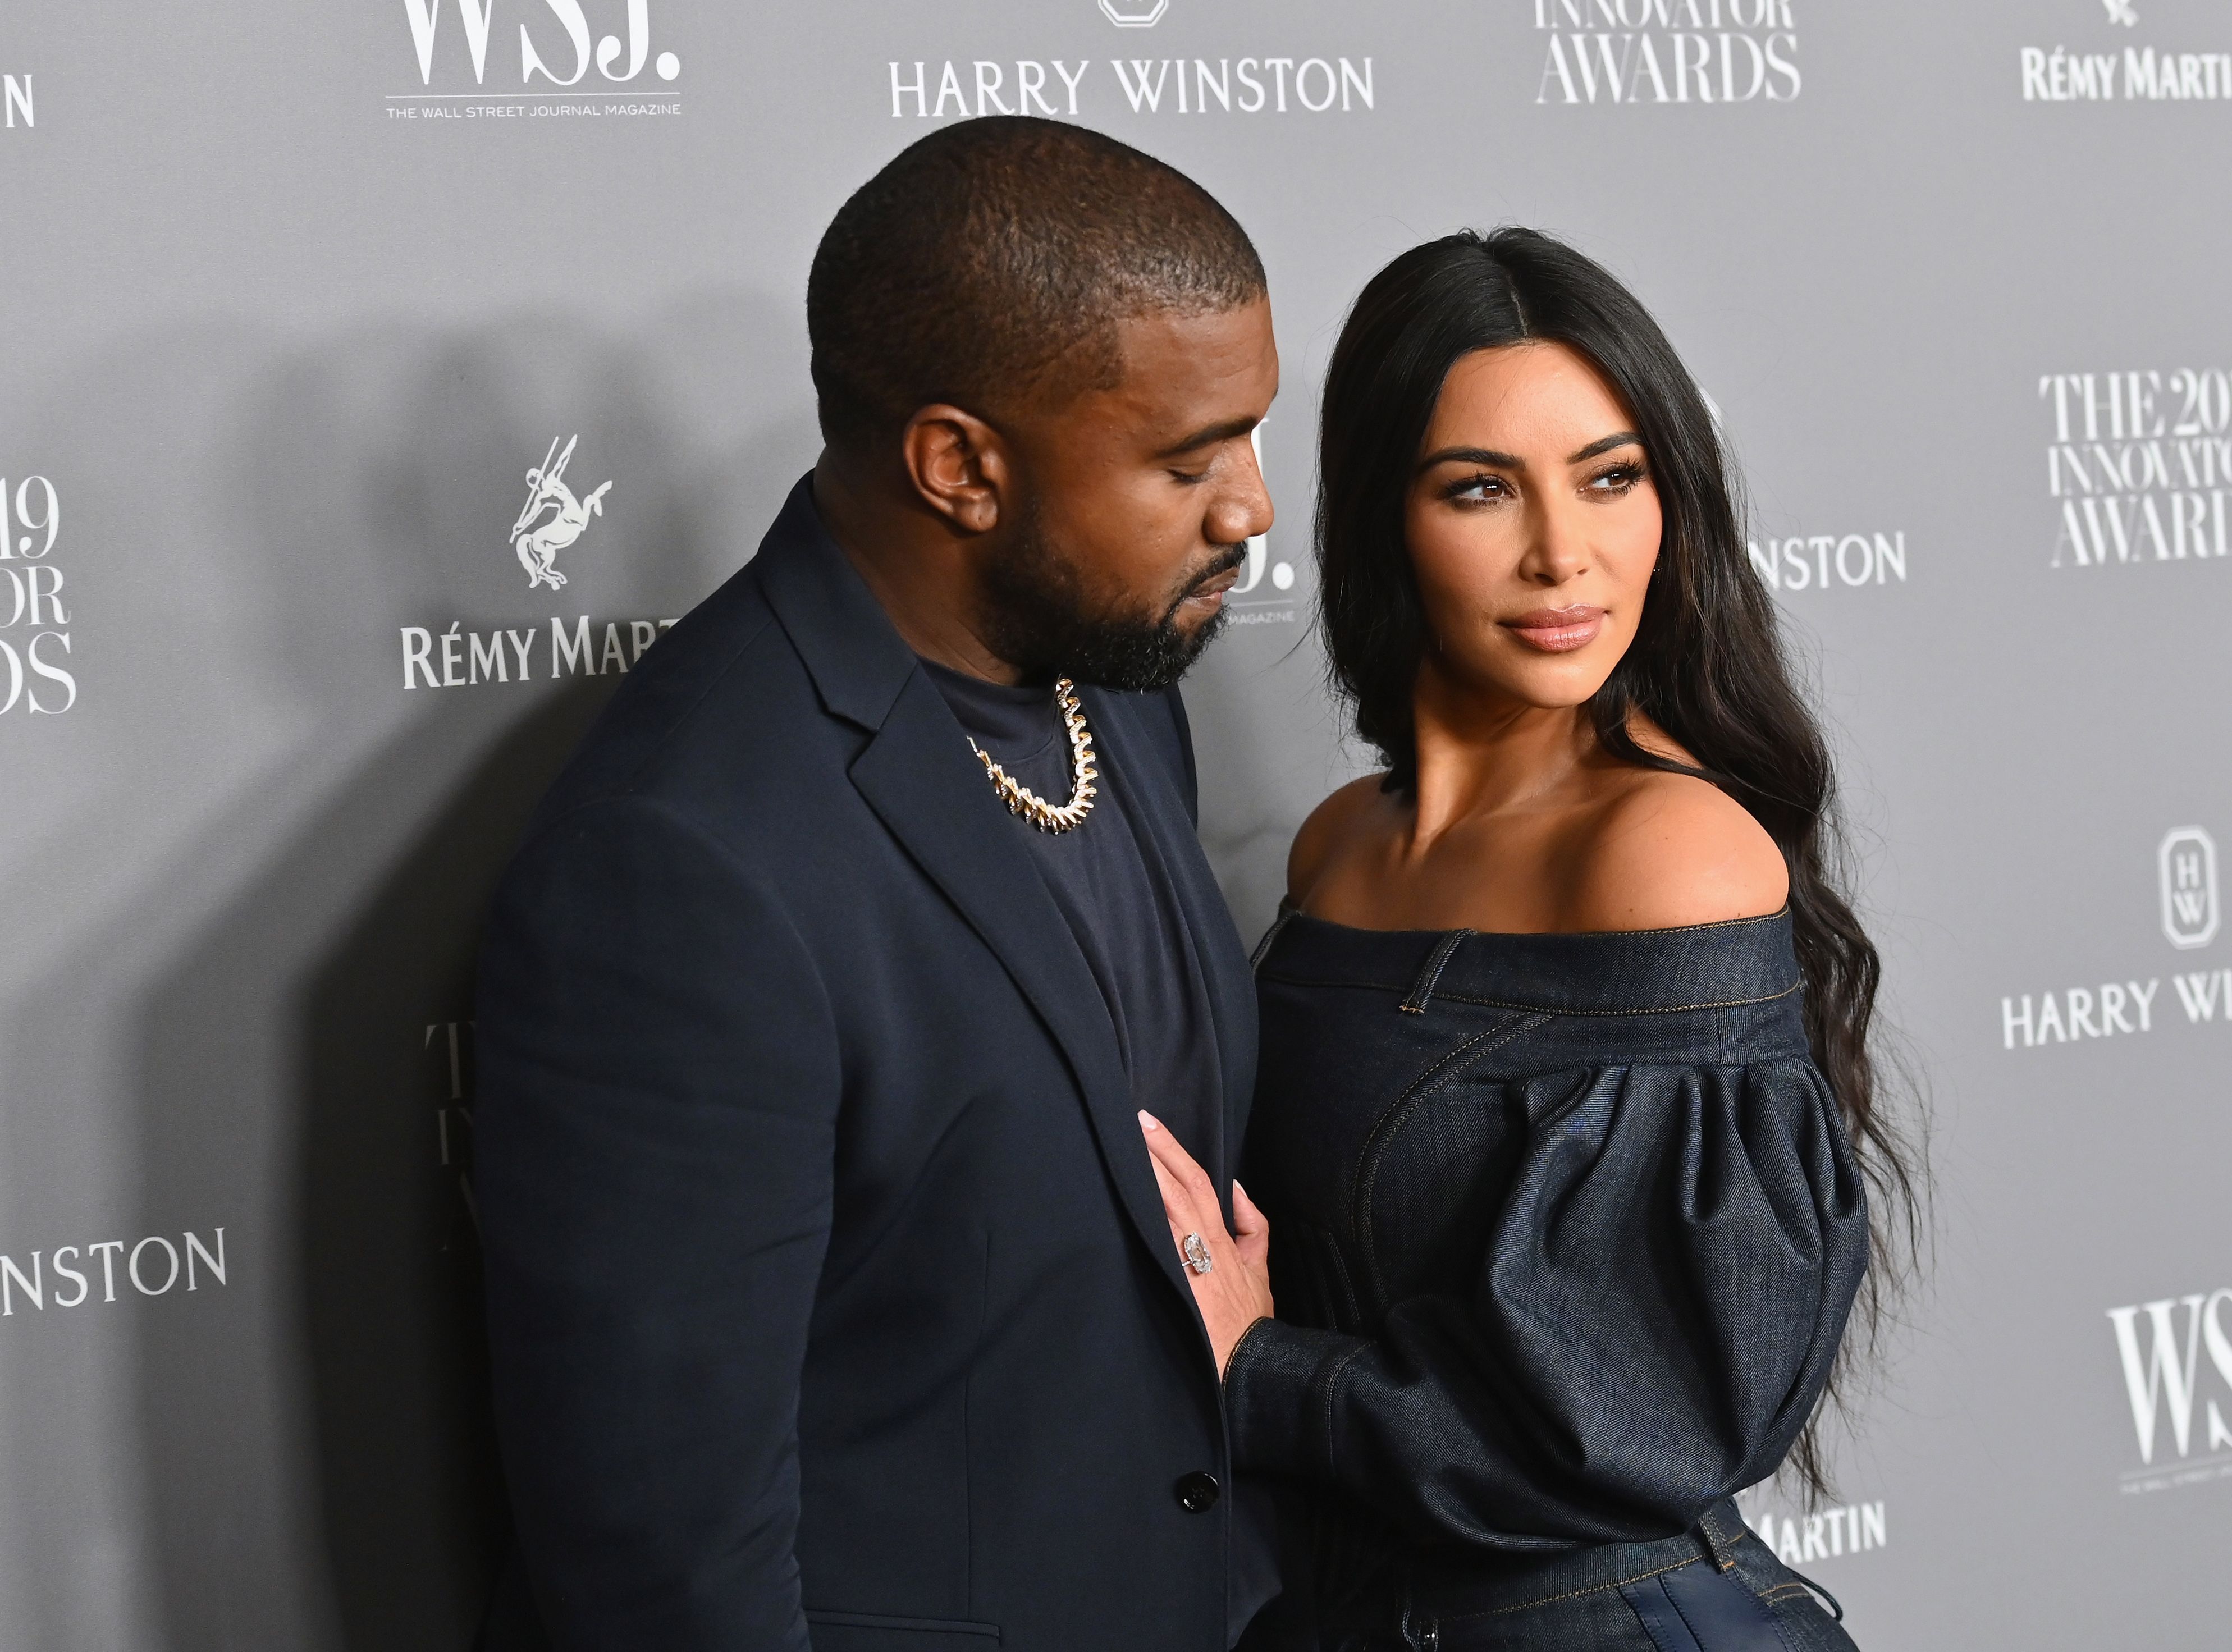 Kim Kardashian 'Isn't in a Rush to File for Divorce' From Kanye West, but Marriage Is 'Beyond Repair'